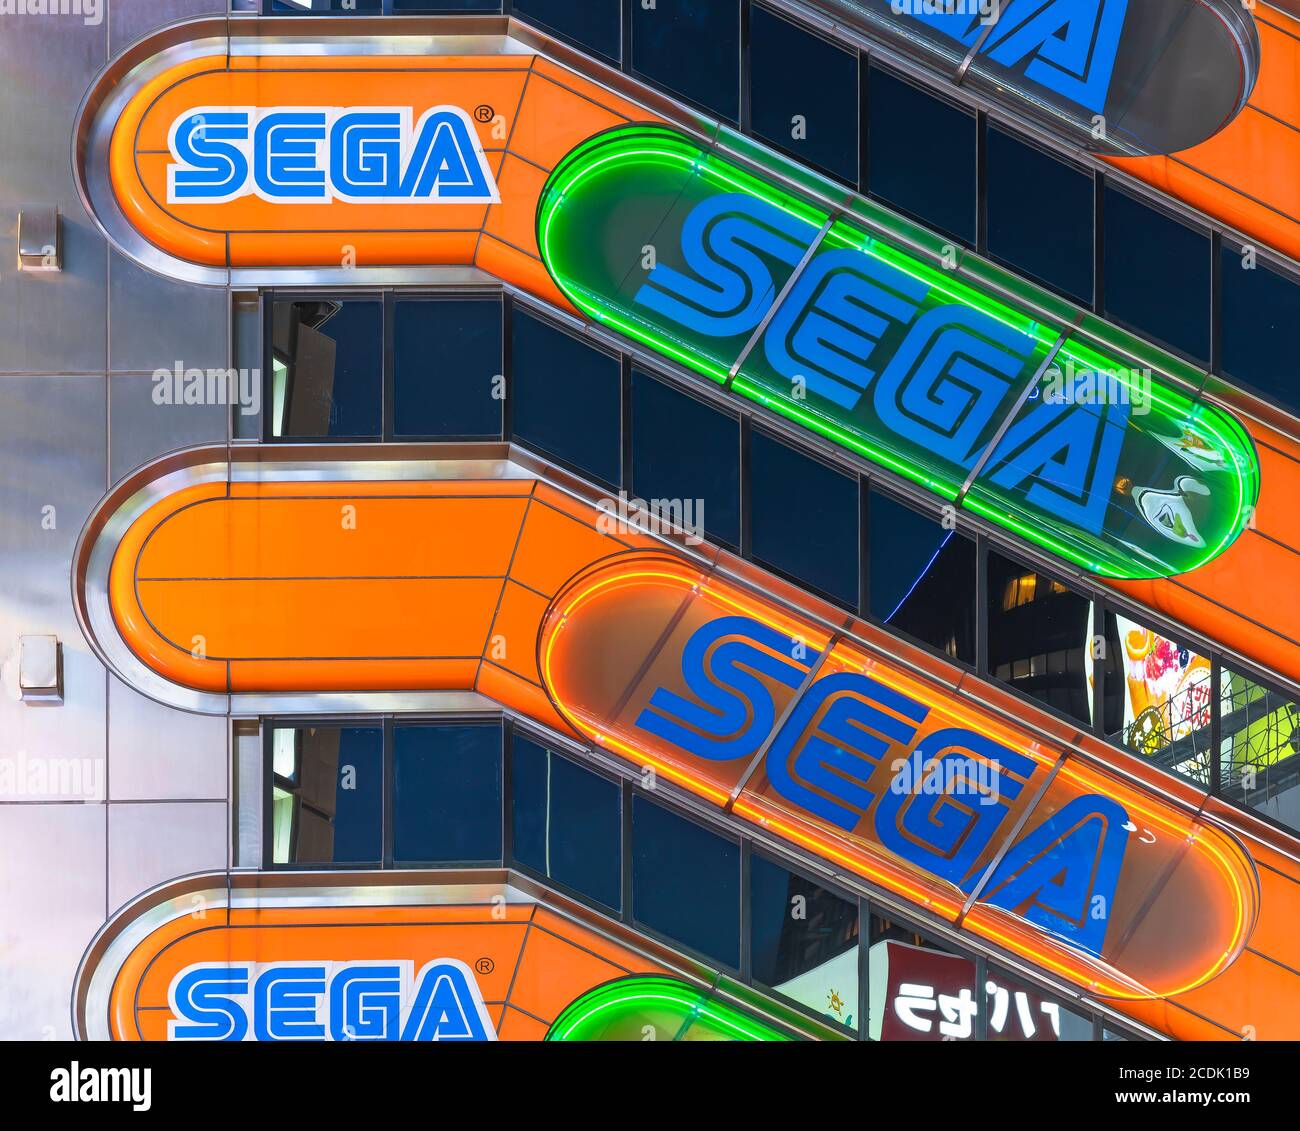 tokyo, japan - august 27 2020: Located in the electric district for 17 years, the iconic video game arcades SEGA Akihabara 2nd building closed down in Stock Photo